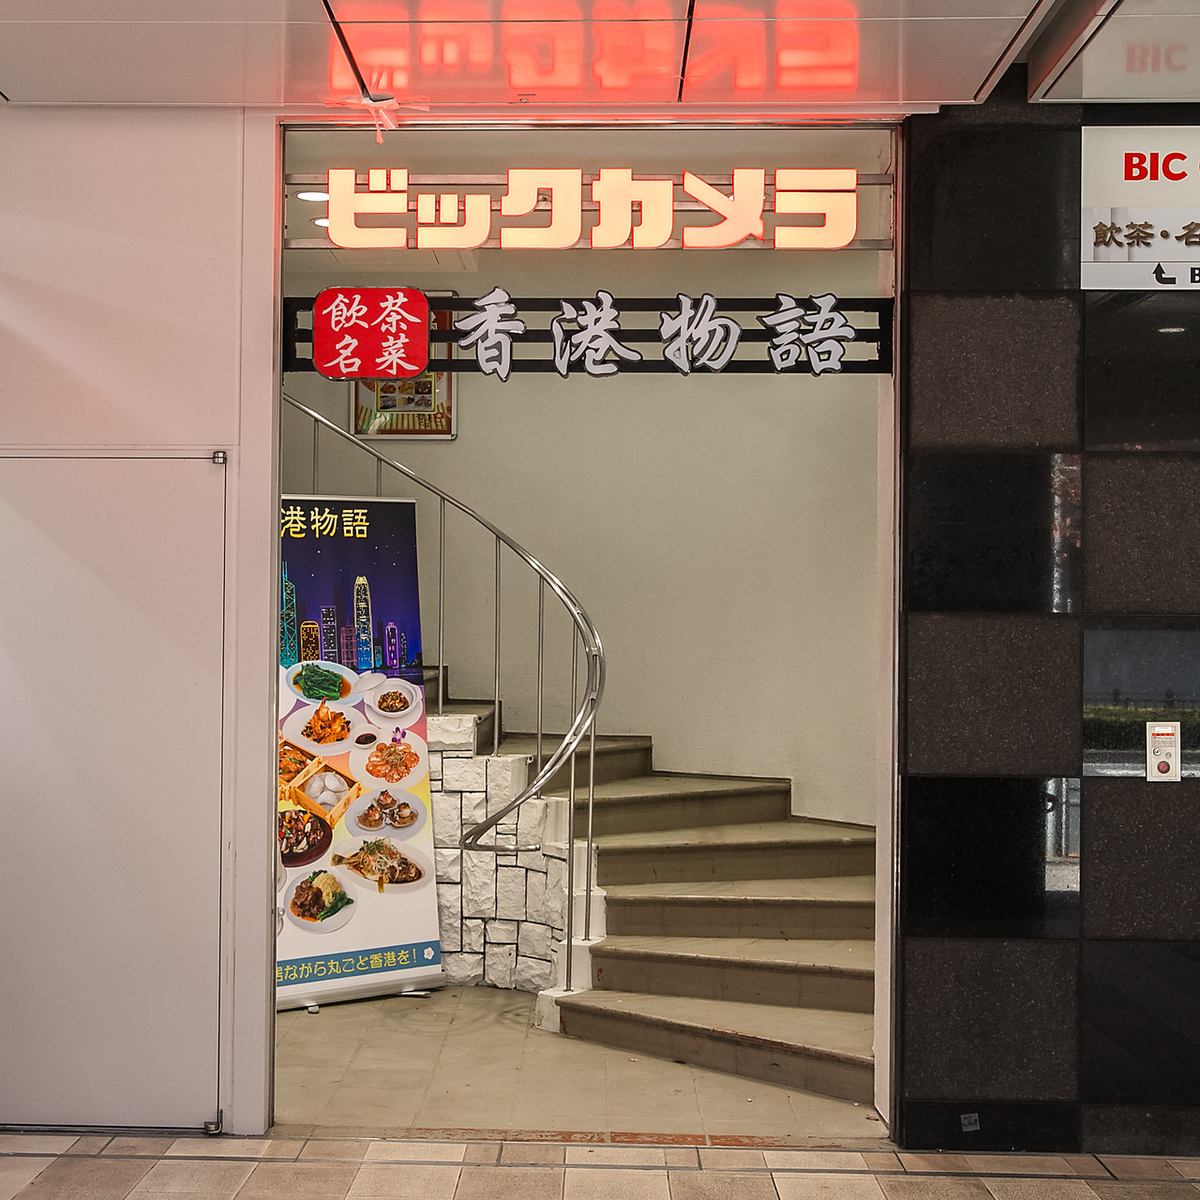 2 minutes walk from Akasakamitsuke Station! Authentic Chinese food is now available on the 2nd floor of Big Camera! Great for parties with a large number of people!